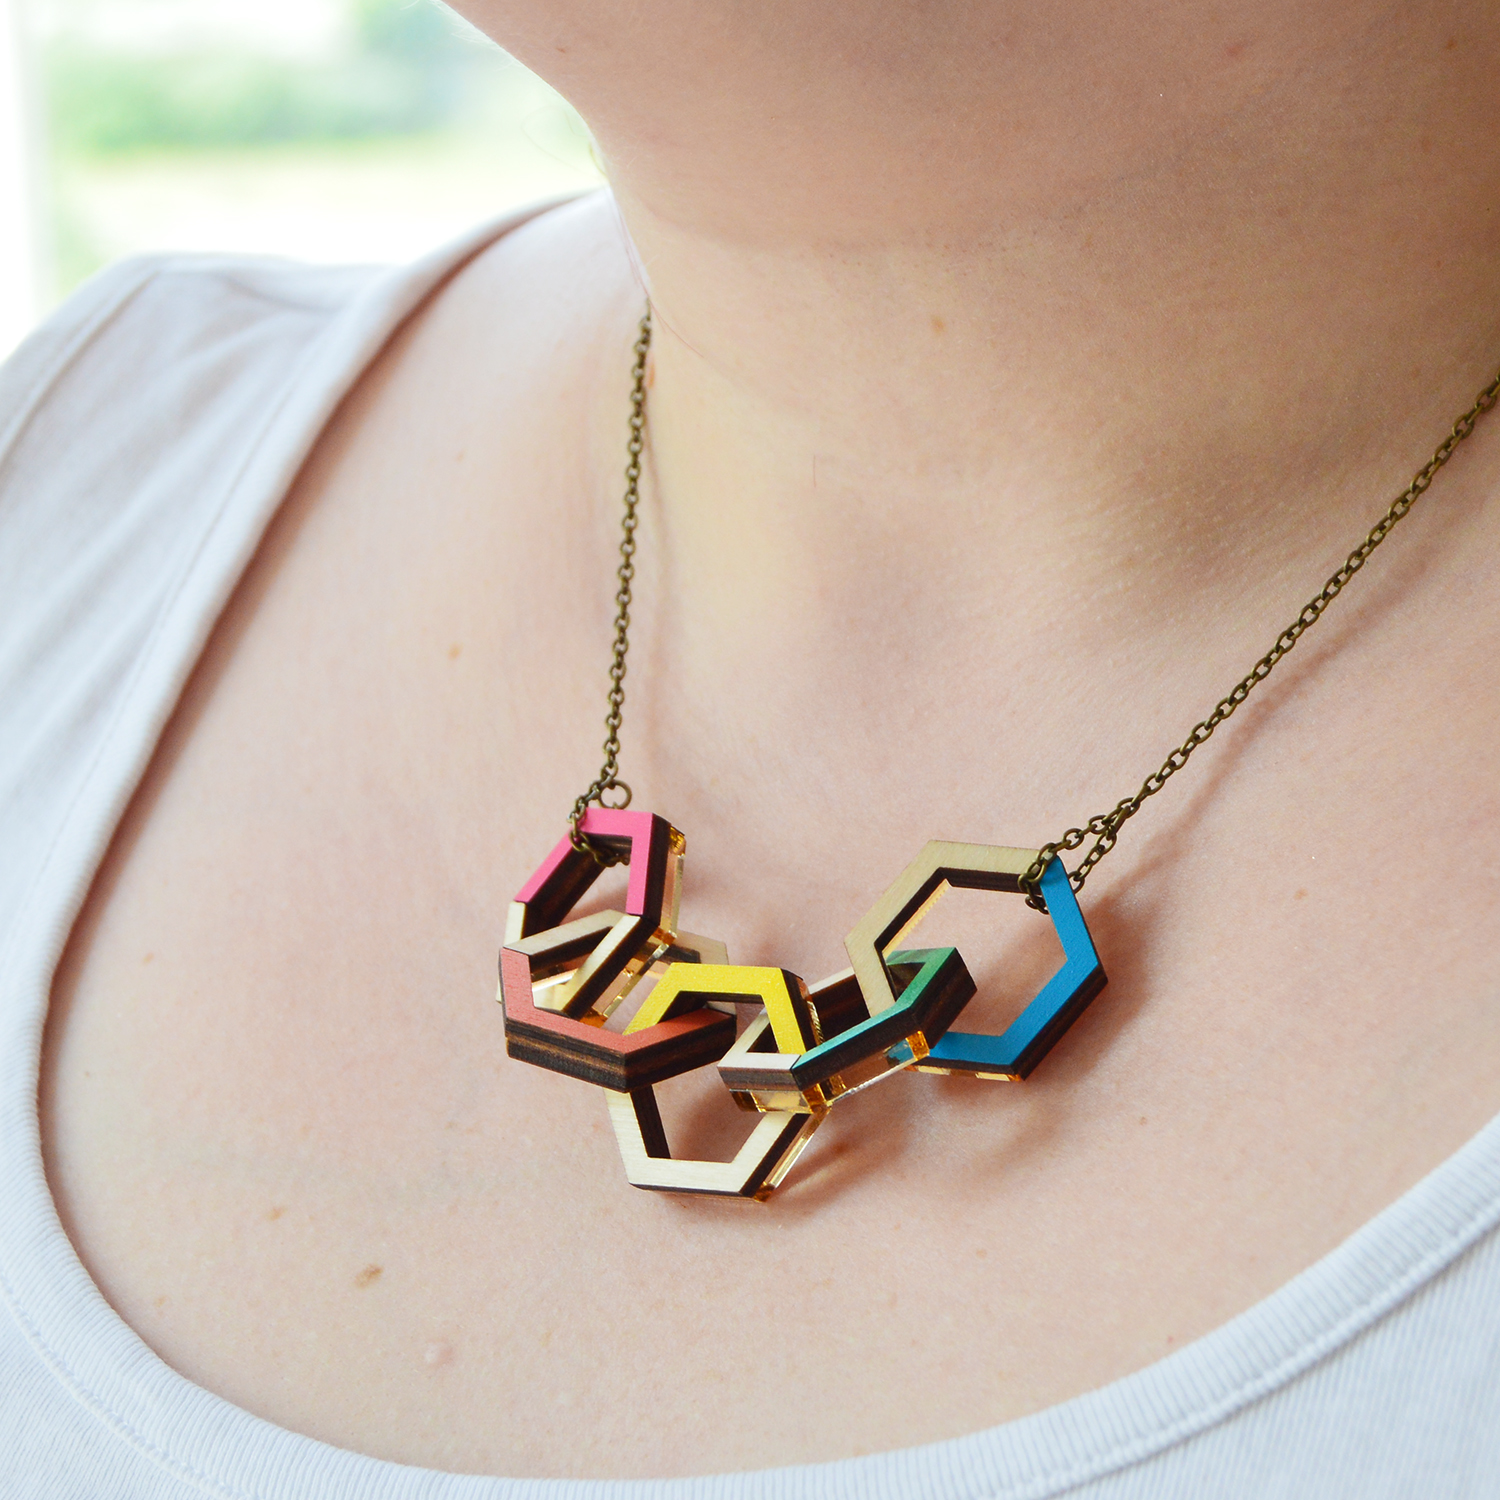 Linked Hexagon Chain Necklace Lifestyle